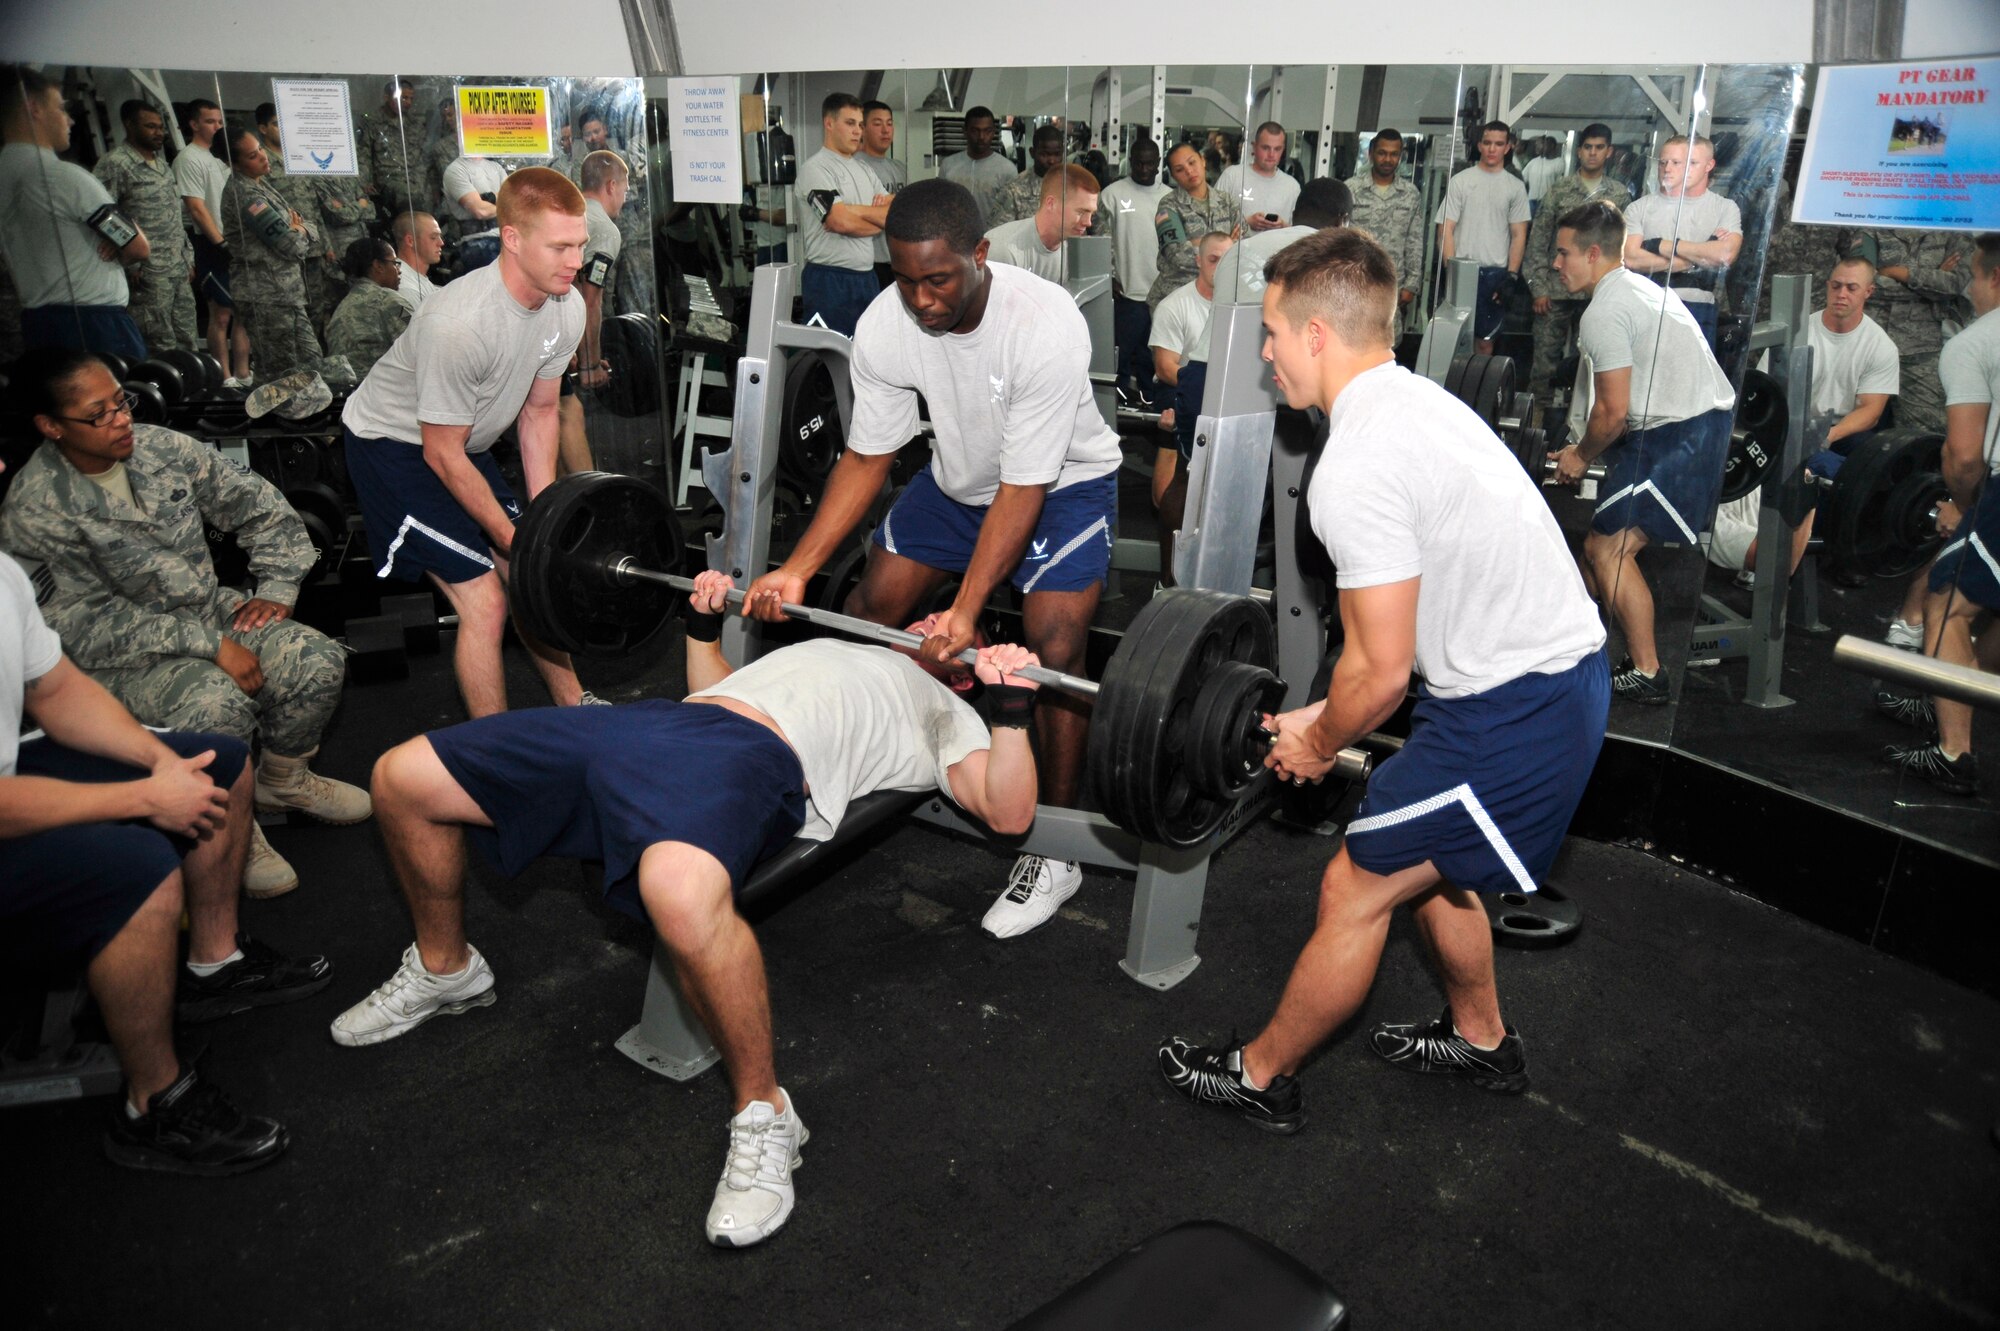 SOUTHWEST ASIA – Spotters help Senior Airman Kenneth Yetter, 380th Expeditionary Civil Engineer Squadron, with an attempted bench press of 360 pounds at the “Strongest in the AOR” competition Dec. 18, 2009. Airman Yetter is deployed from Dover Air Force Base, Del., and hails from Spokane Washington. Airman Yetter was named the strongest man at the 380th Air Expeditionary Wing. (U.S. Air Force photo/Tech. Sgt. Charles Larkin Sr)